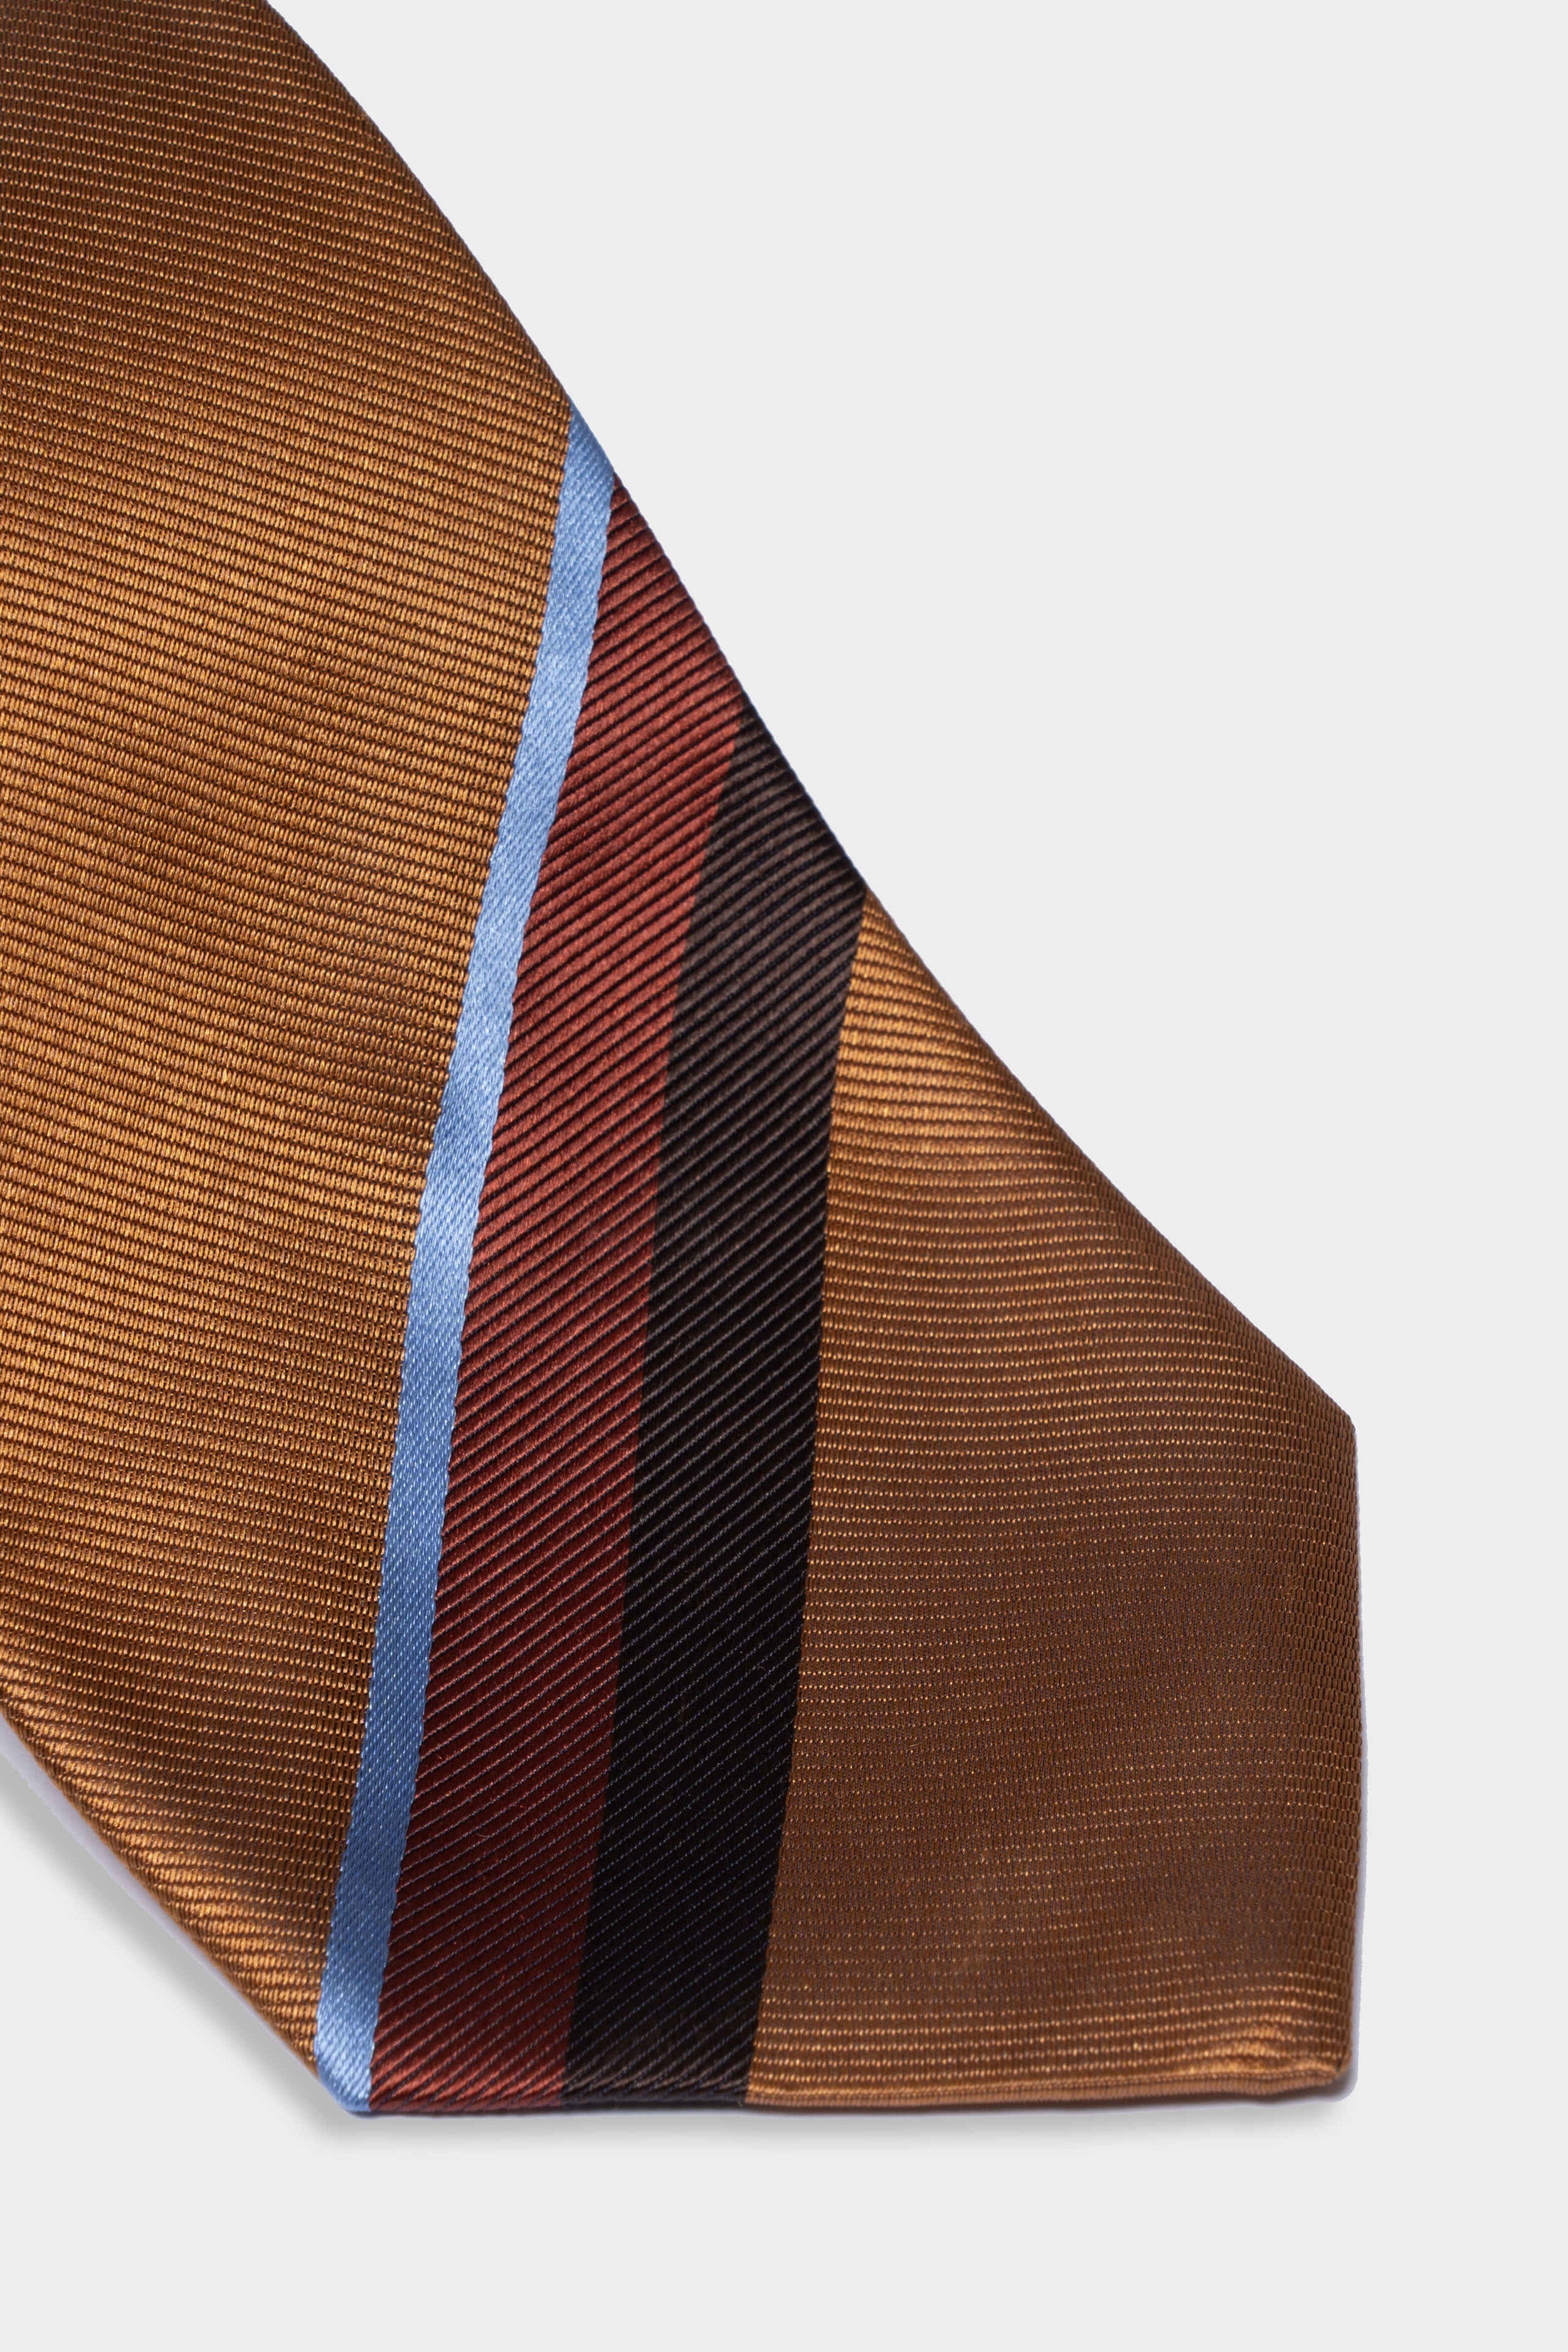 Tie fantasy with stripes - STRIPED RUST